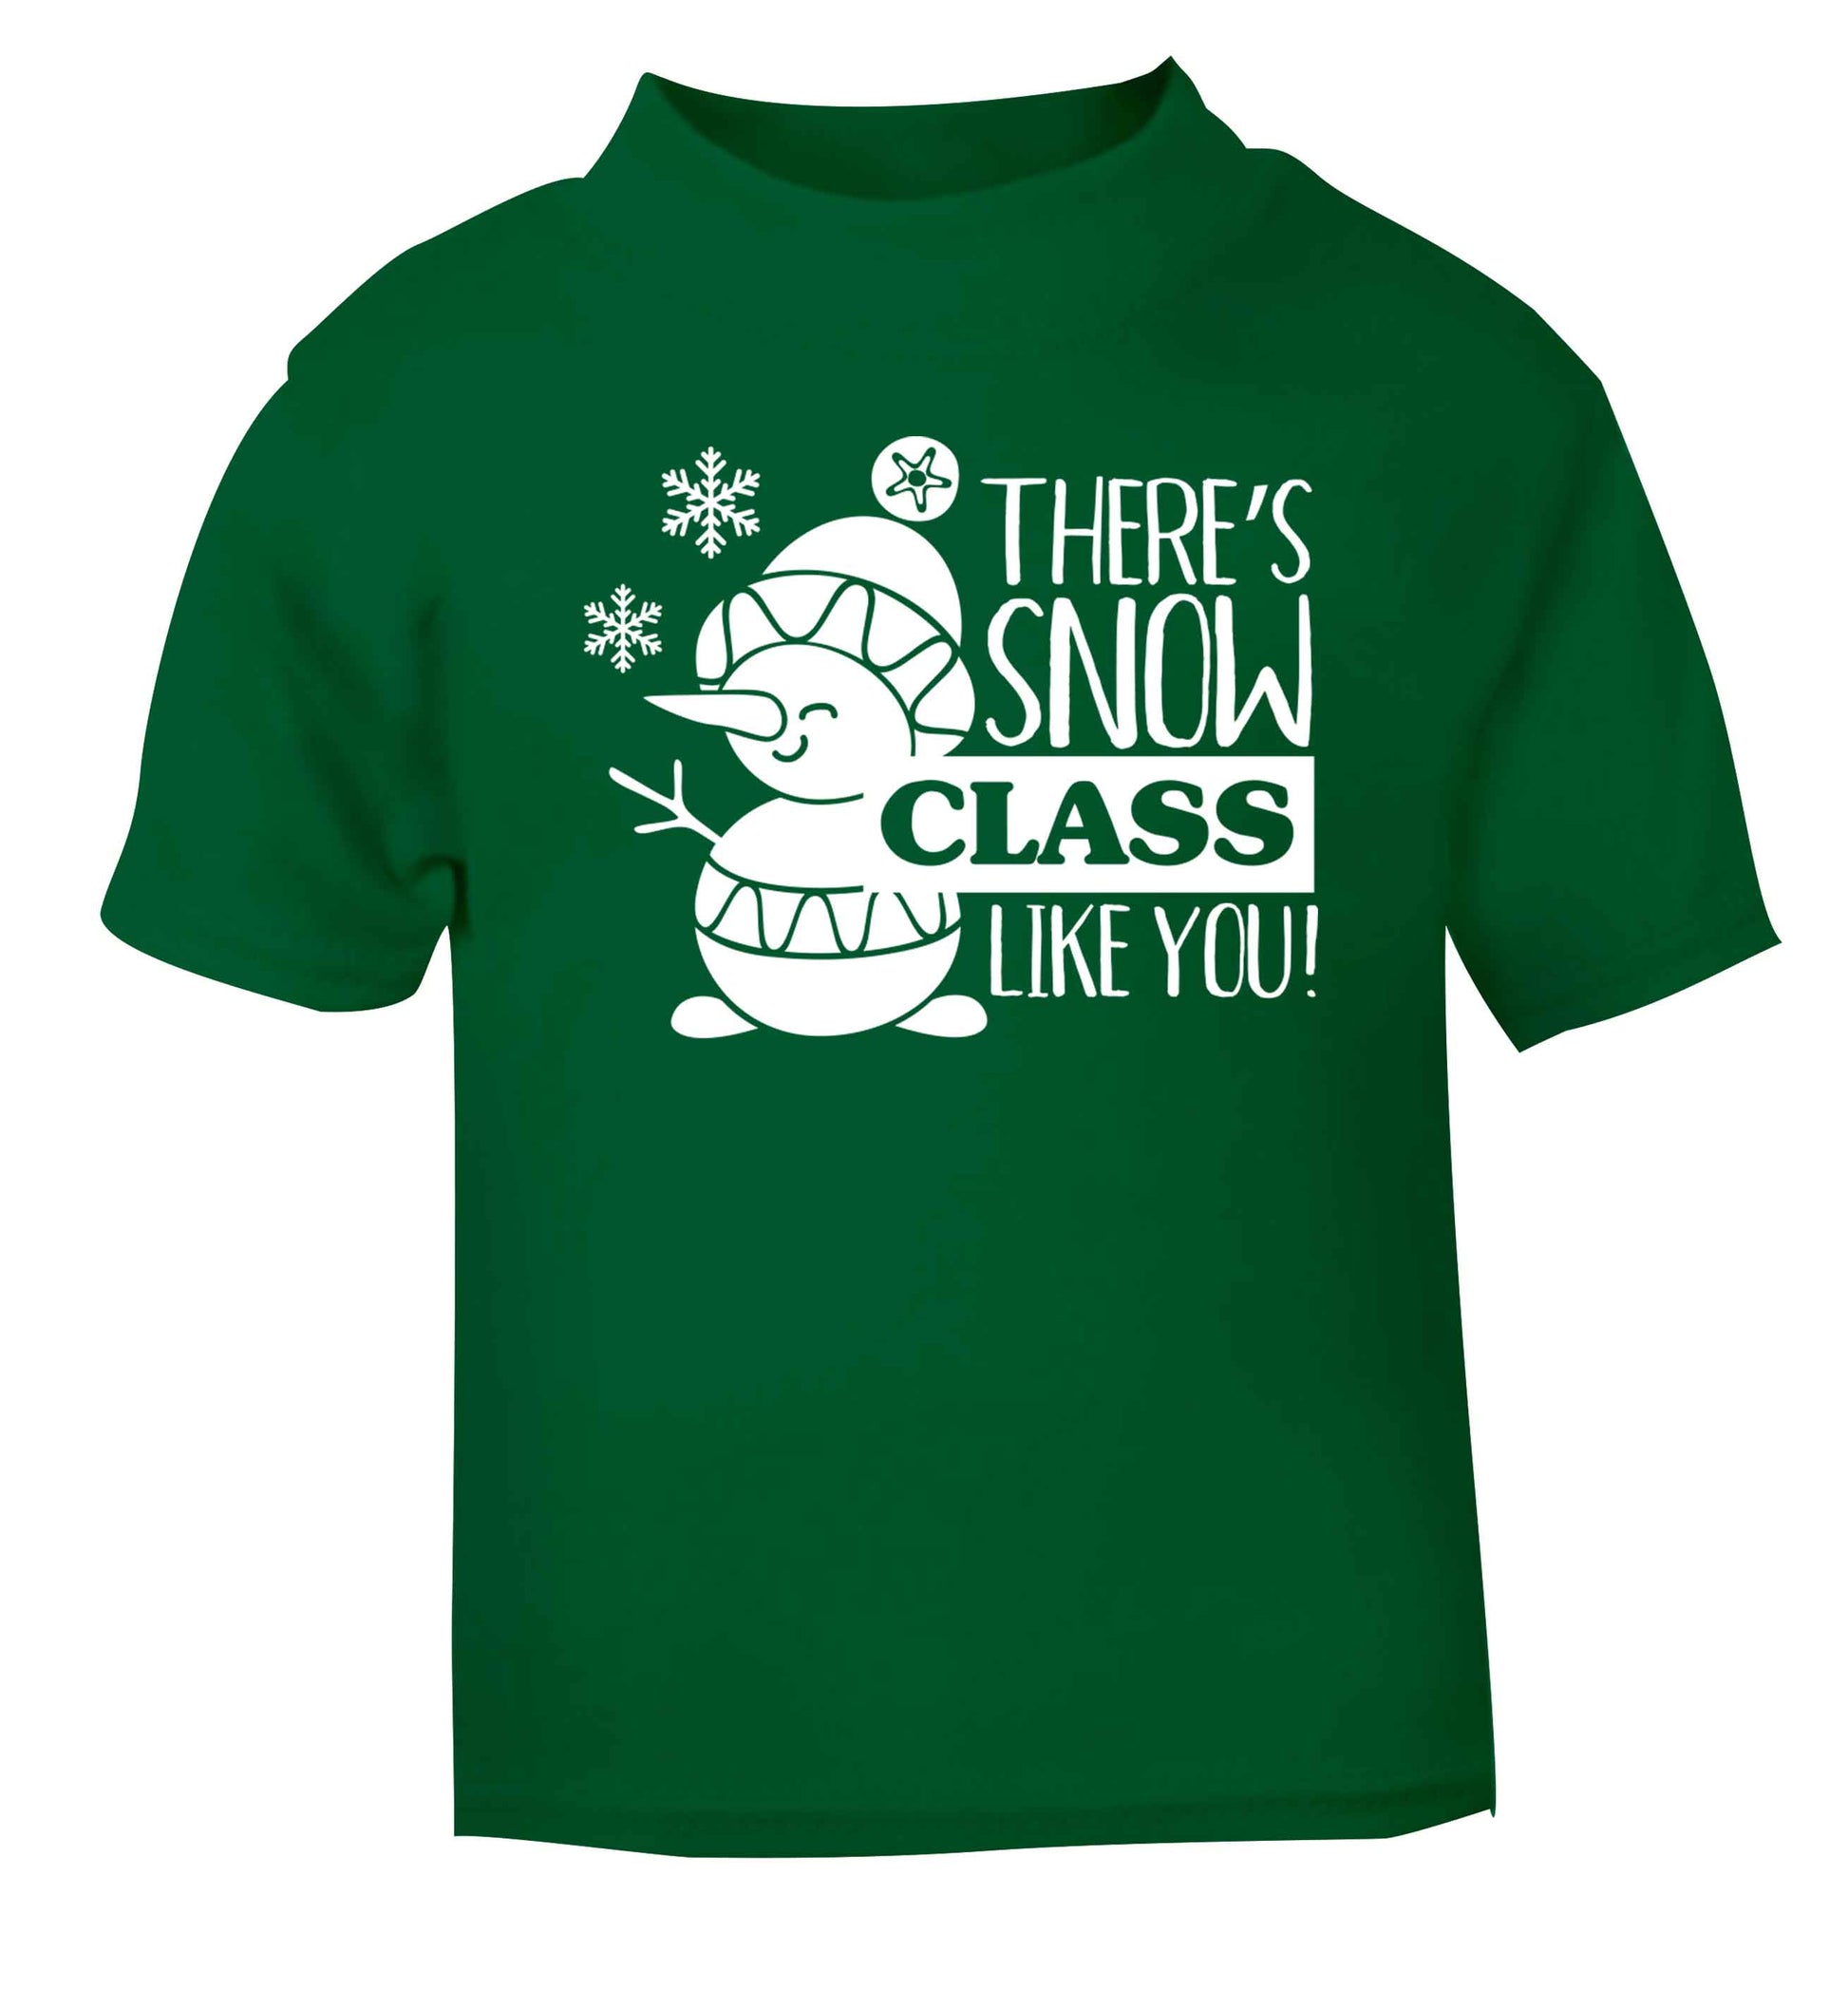 There's snow class like you green baby toddler Tshirt 2 Years